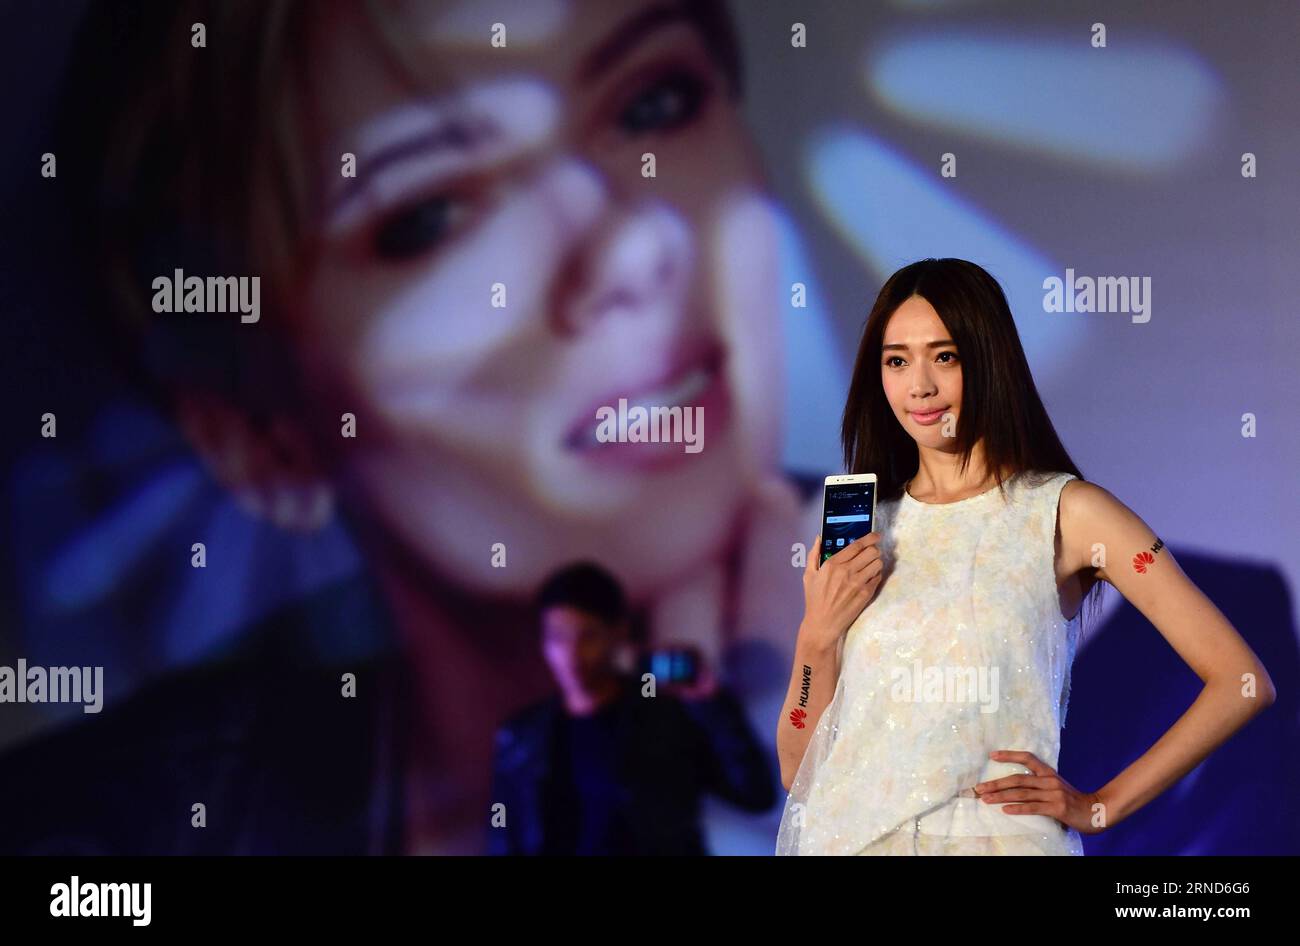 (160506) -- TAIPEI, May 6, 2016 -- A model presents Huawei P9, a flagship smartphone of China s Huawei Technologies, at a product launch in Taipei, southeast China s Taiwan, May 5, 2016. The P9 features a dual-lens camera co-engineered with Germany s Leica that Huawei hopes will set it apart from all other Android devices on the market. ) (lfj) CHINA-TAIPEI-HUAWEI P9-LAUNCH (CN) WeixPeiquan PUBLICATIONxNOTxINxCHN   160506 Taipei May 6 2016 a Model Presents Huawei p9 a Flagship Smartphone of China S Huawei Technologies AT a Product Launch in Taipei South East China S TAIWAN May 5 2016 The p9 Fe Stock Photo